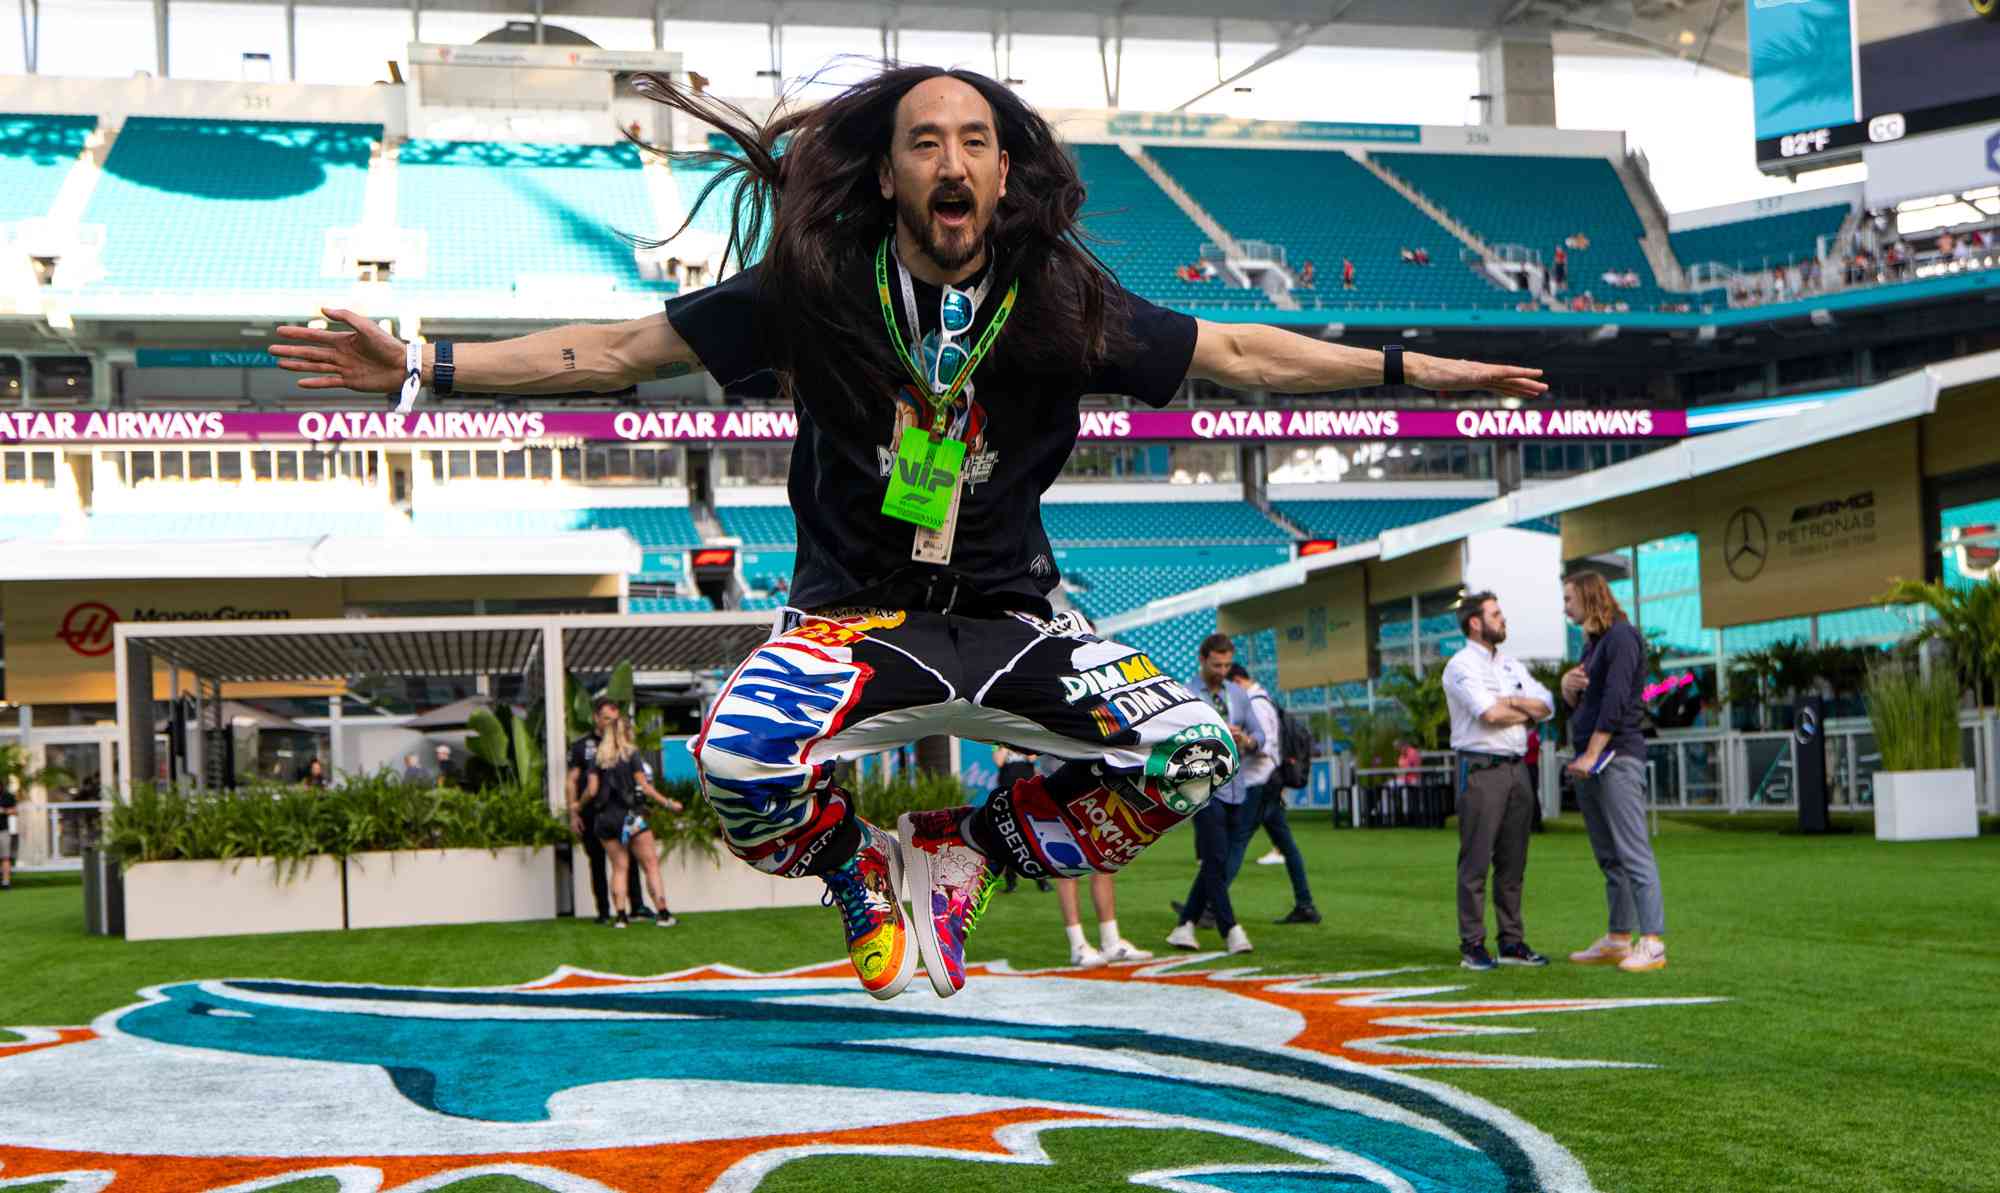 Steve Aoki jumps in the paddock during practice ahead of the F1 Grand Prix of Miami